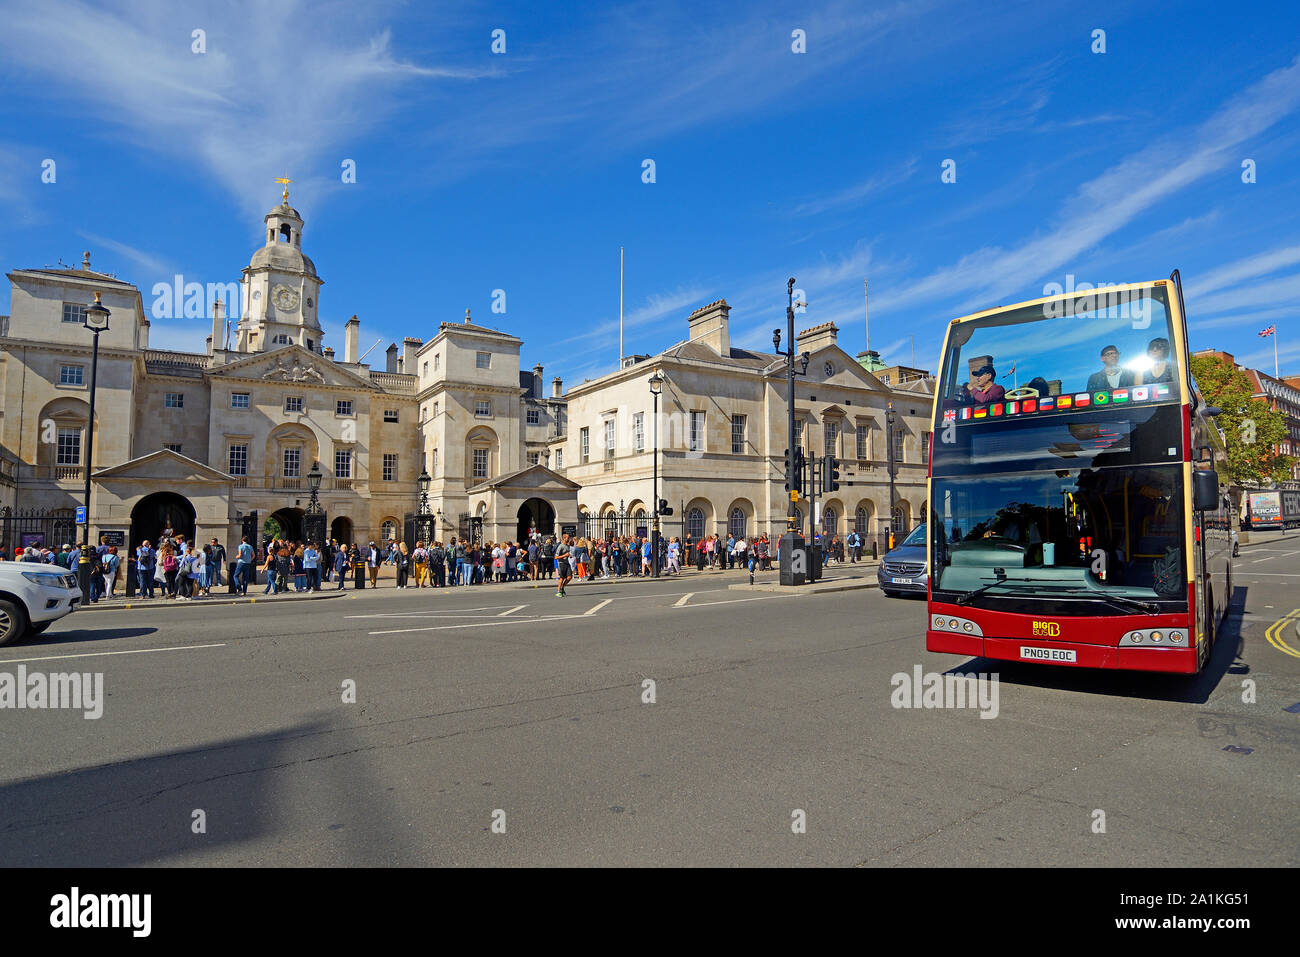 London, England, UK. Open-top tourist bus in Whitehall, by Horse Guards Parade Stock Photo